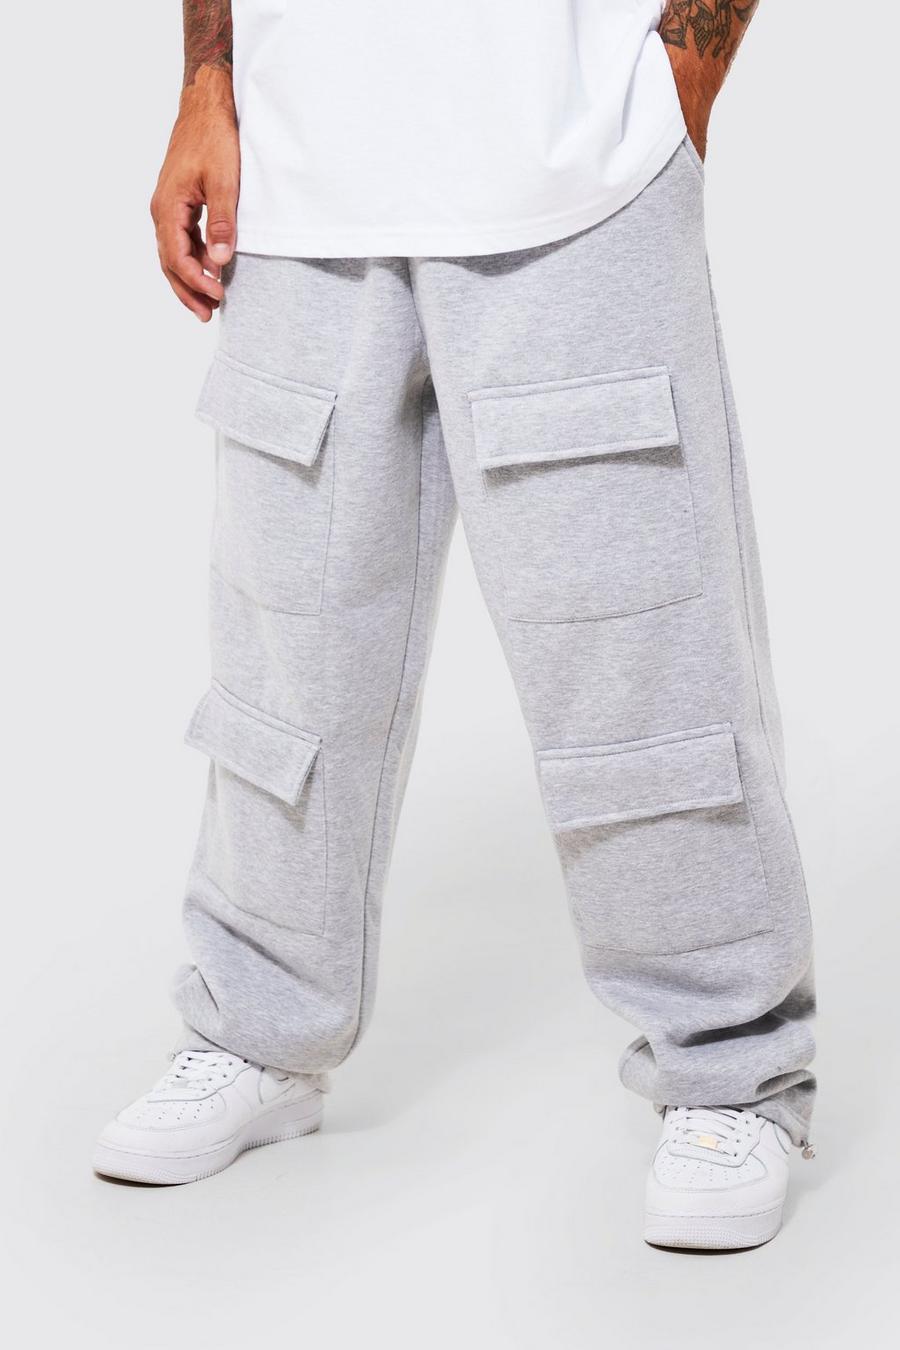 Grey marl gris Tall Baggy Fit Front Pocket Cargo Jogger